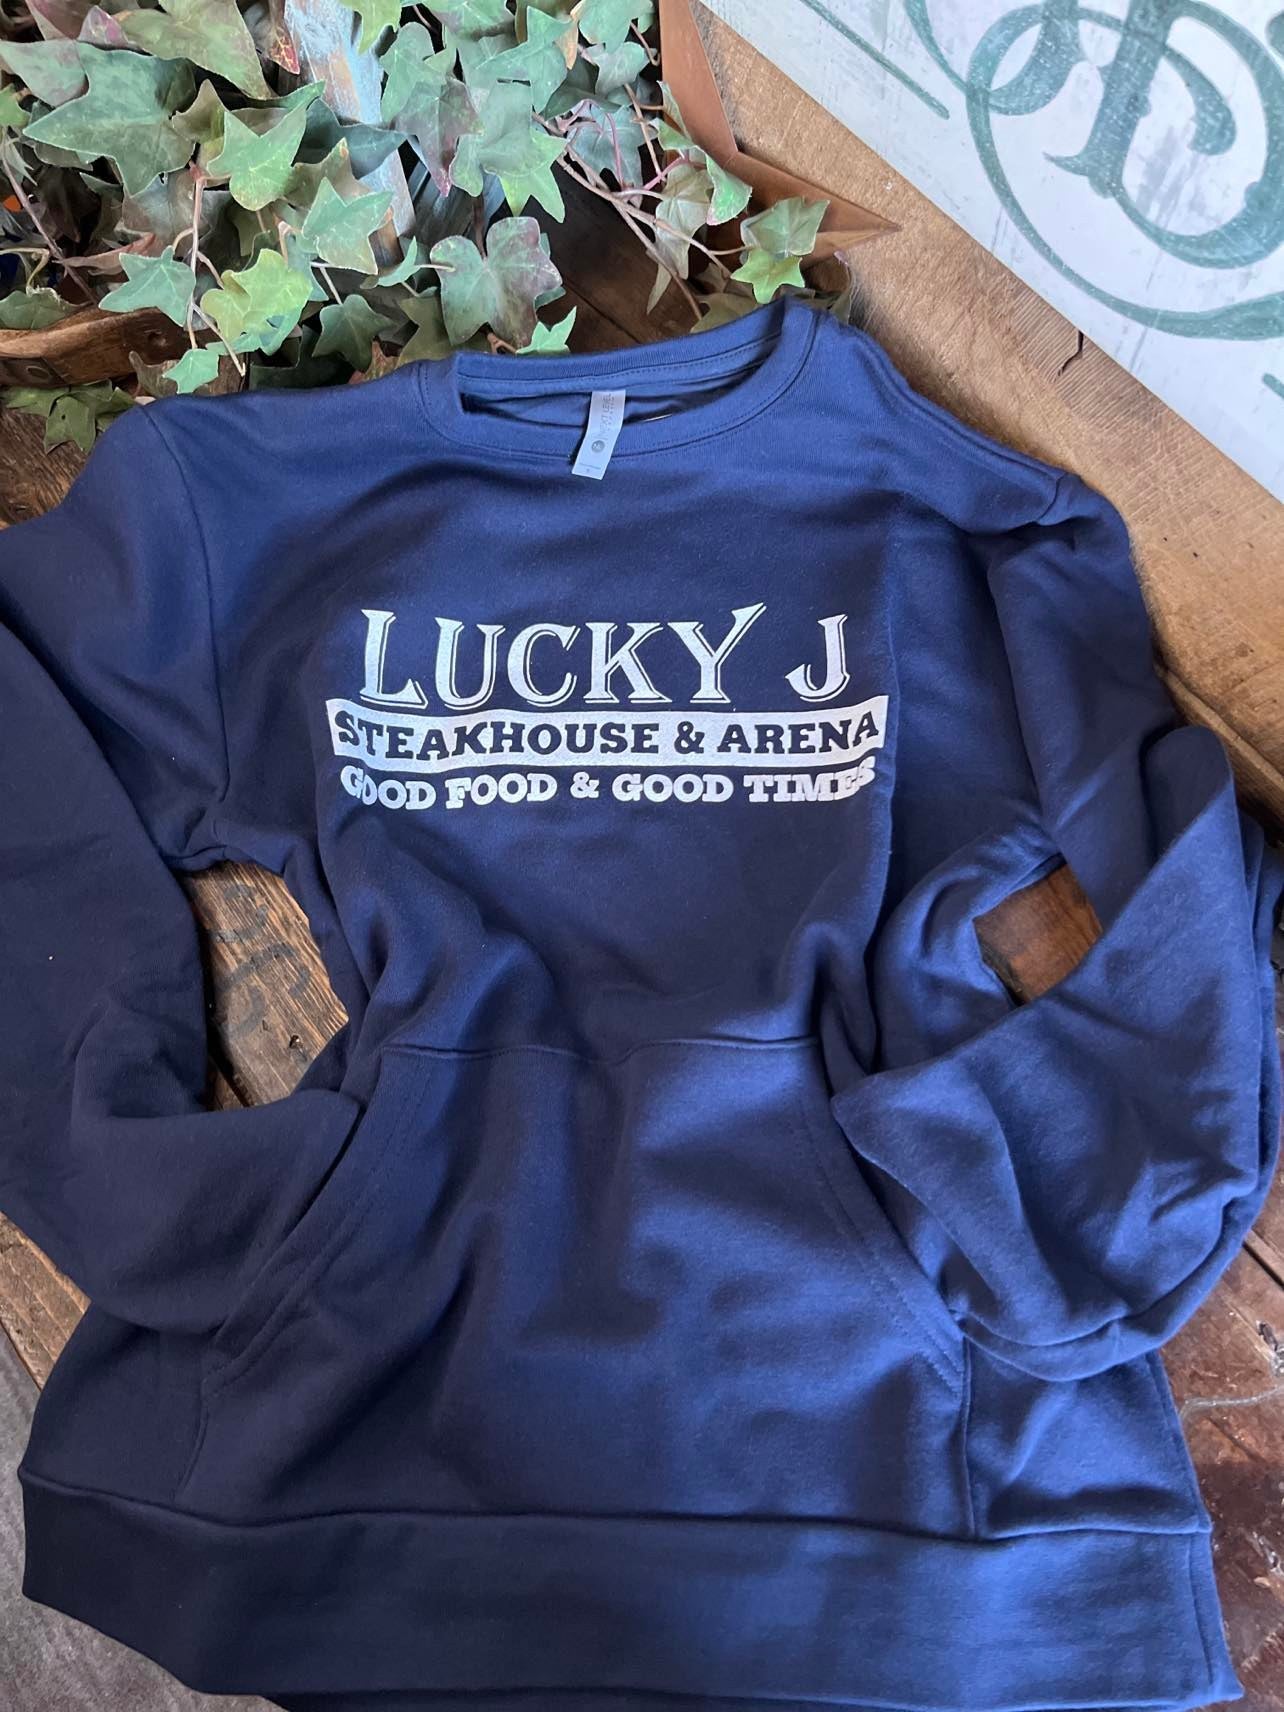 LJ Next Level Sweatshirt-Sweatshirts-The Dugout-Lucky J Boots & More, Women's, Men's, & Kids Western Store Located in Carthage, MO